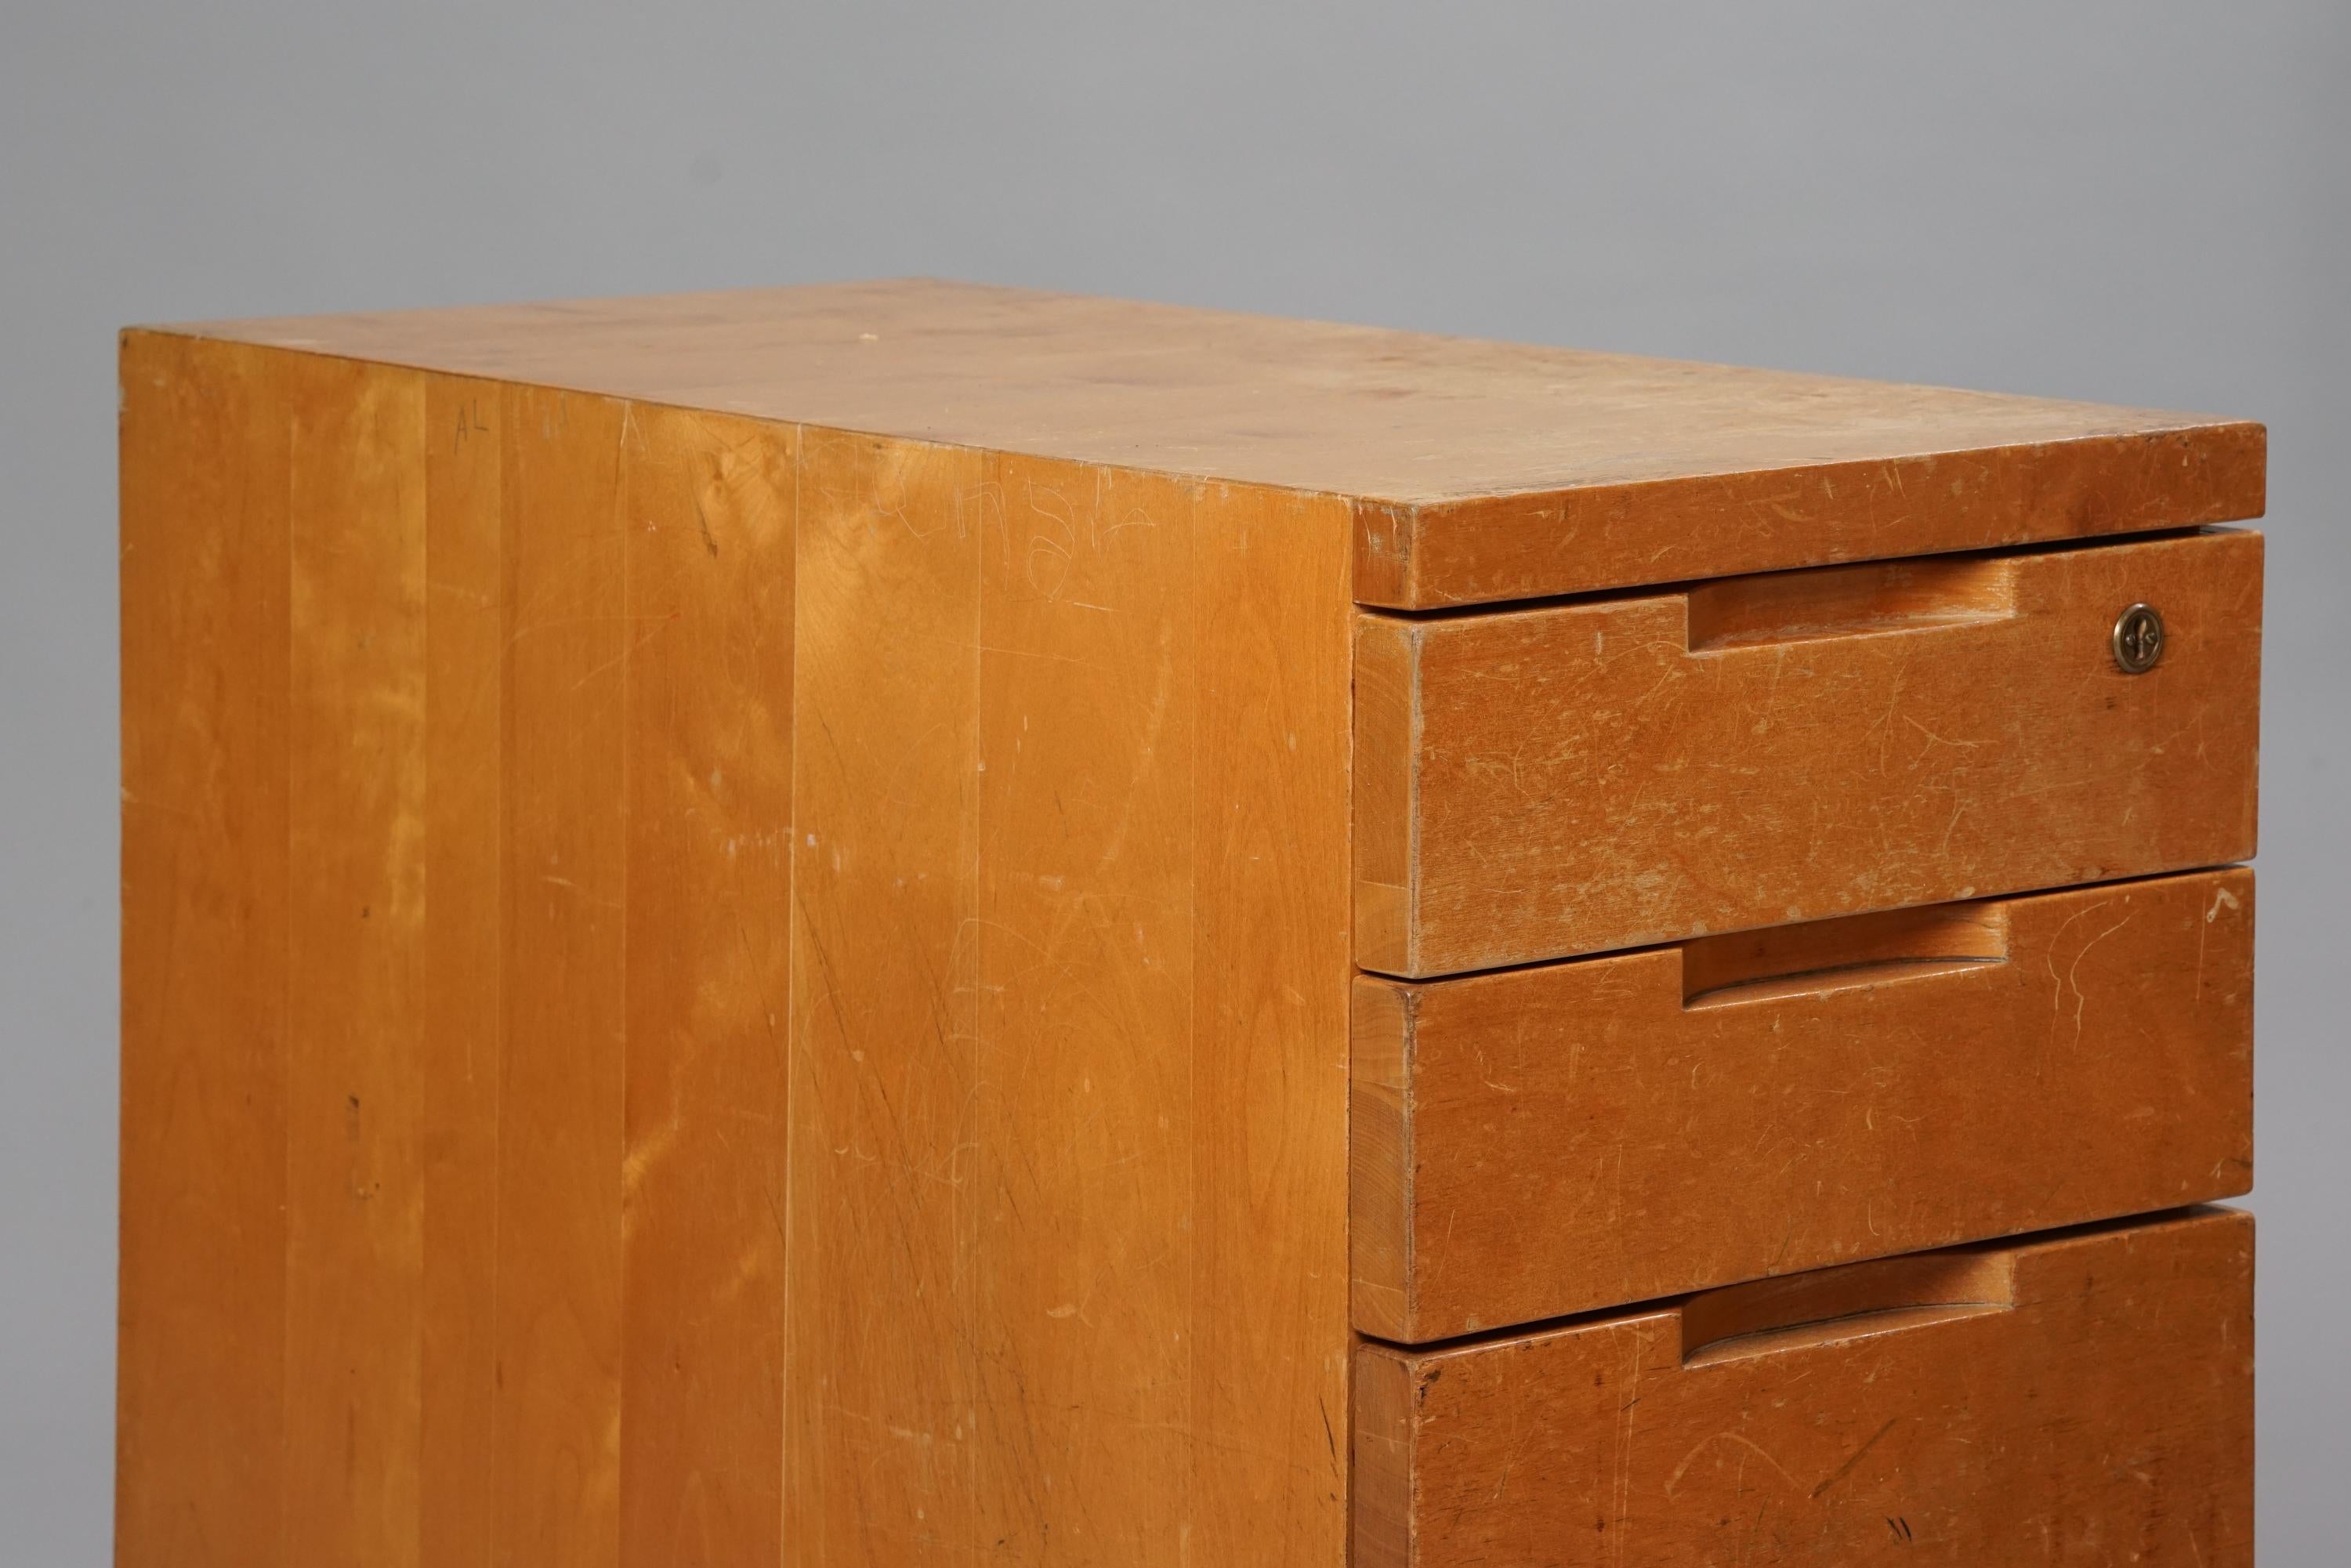 Model HB96 chest of drawers, design by Alvar Aalto, 1930s. Birch. Good vintage condition, rich patina and wear consistent with age and use. 

Alvar Aalto (1898-1976) is probably the most famous Finnish architect and designer in the world. Aalto